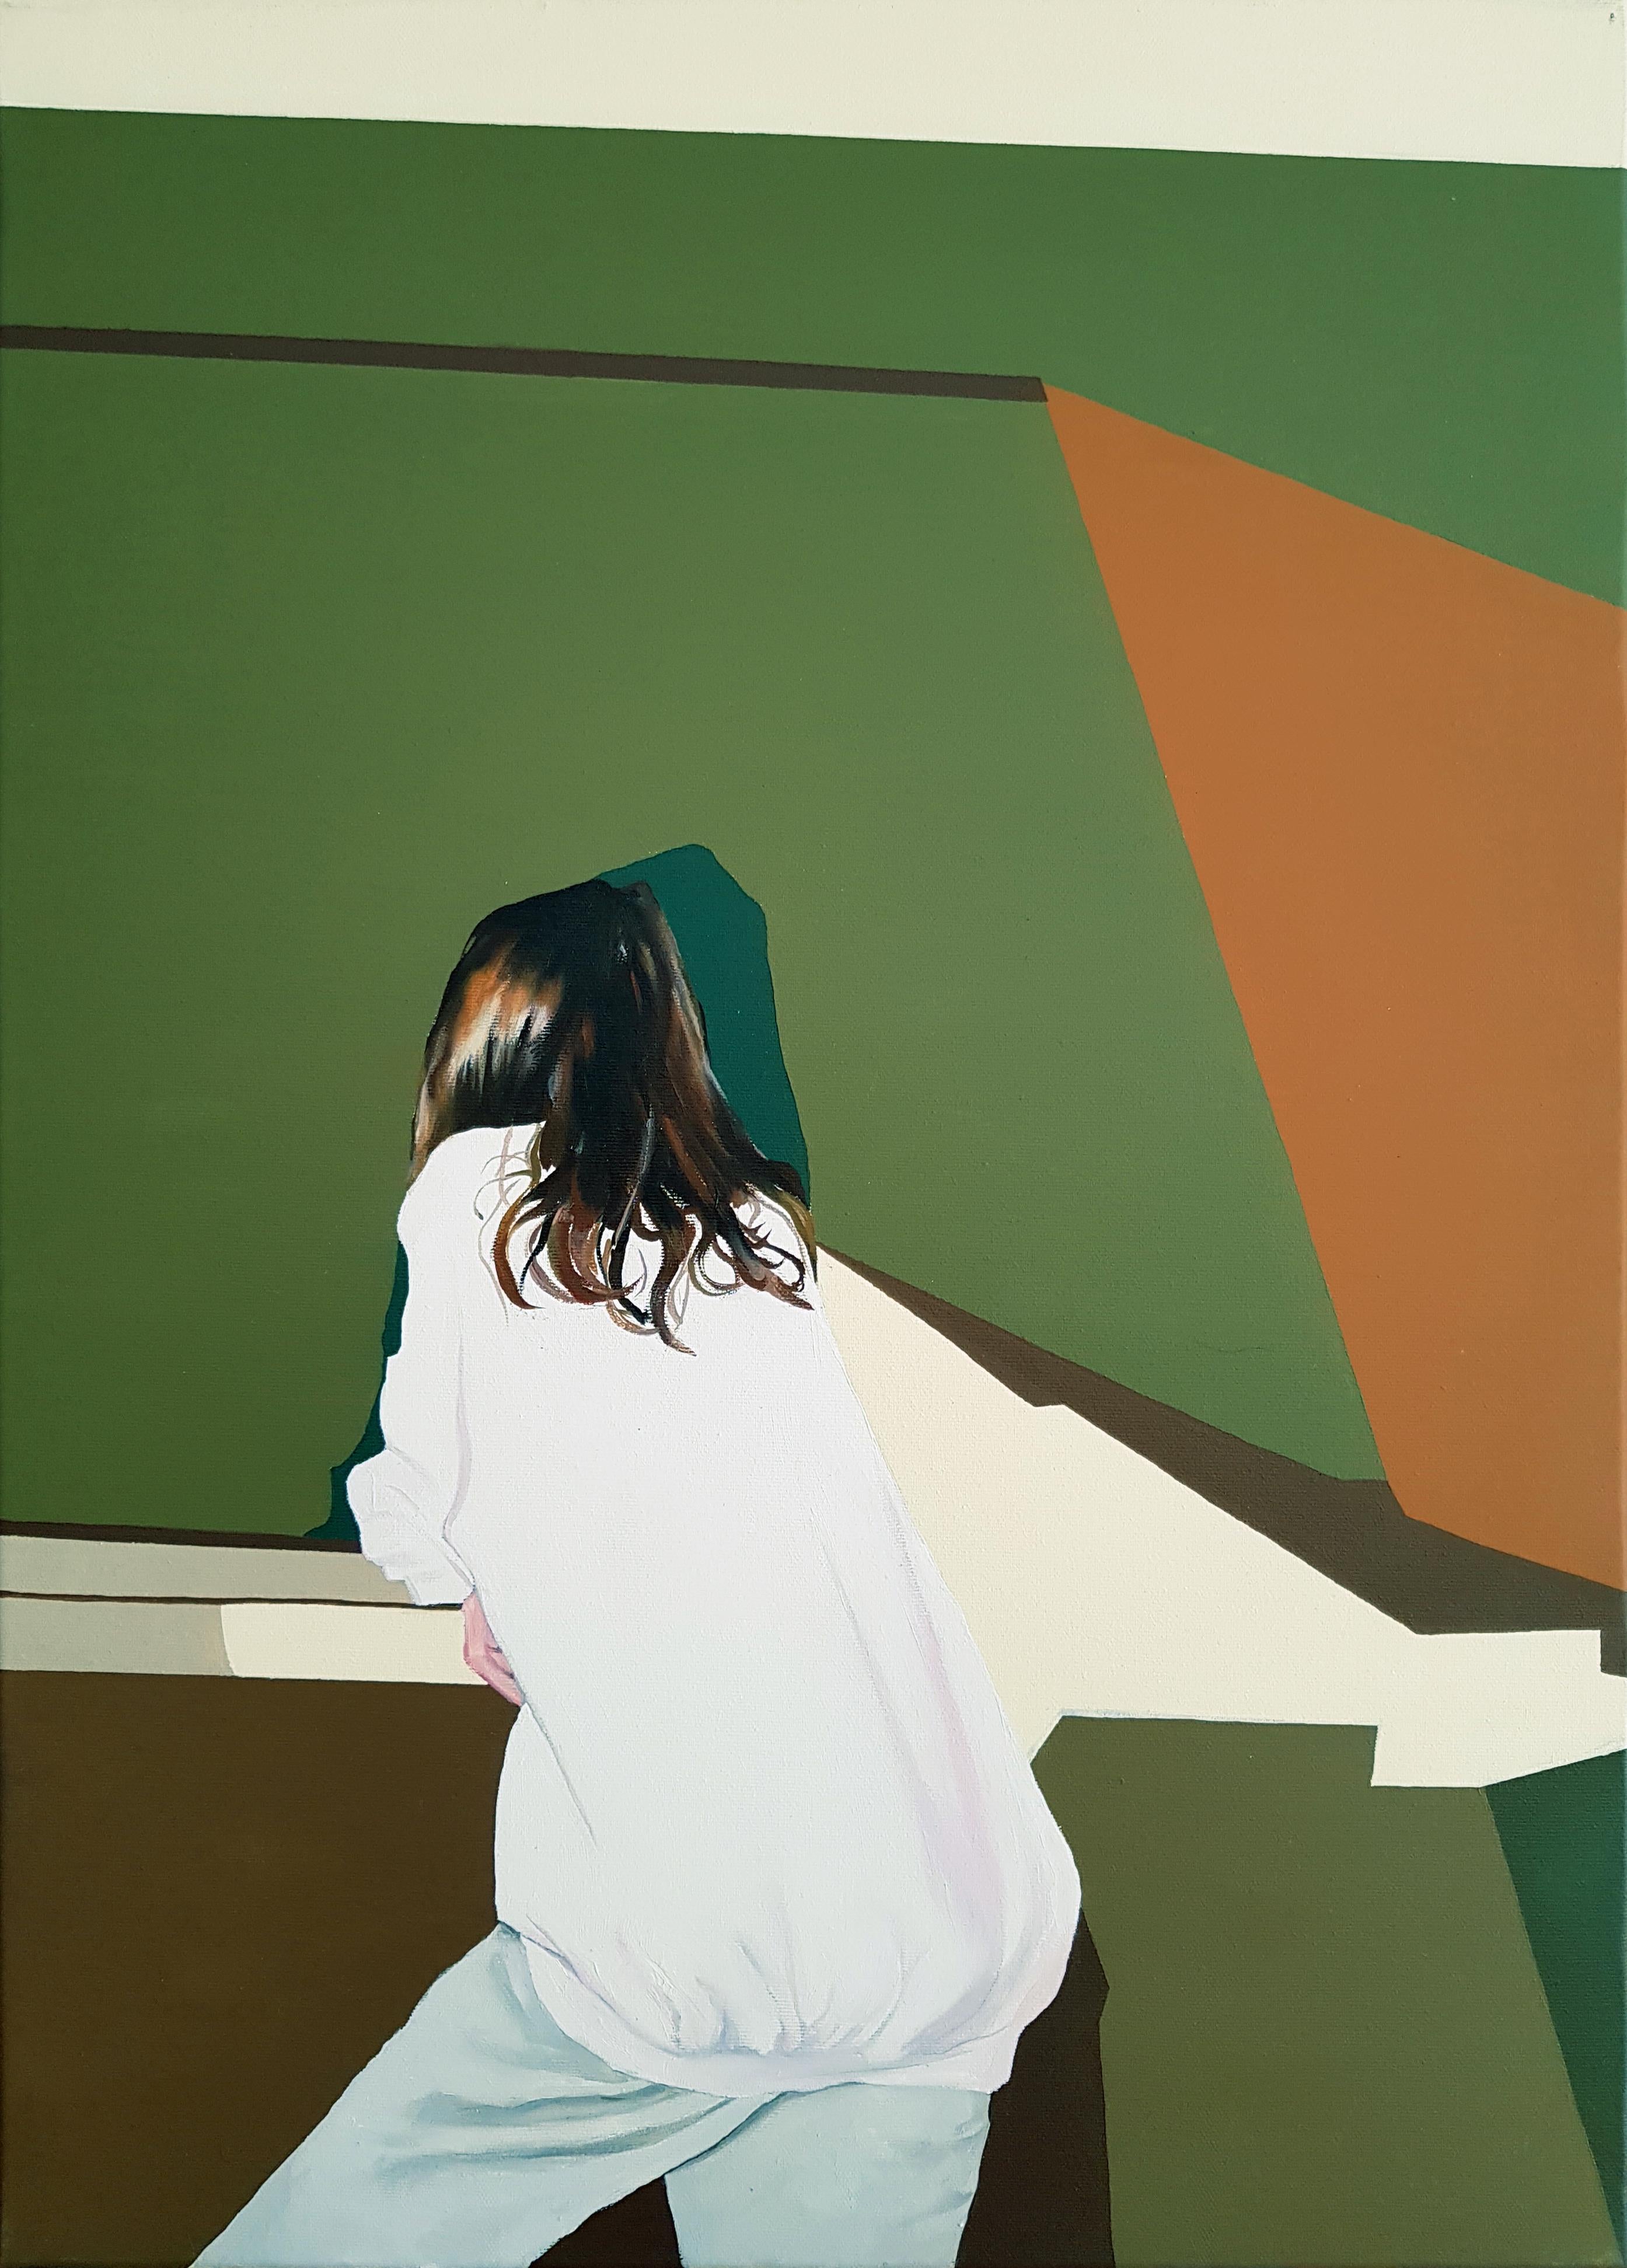 Spirited Bystander - Contemporary, Painting, Green, White, 21st Century